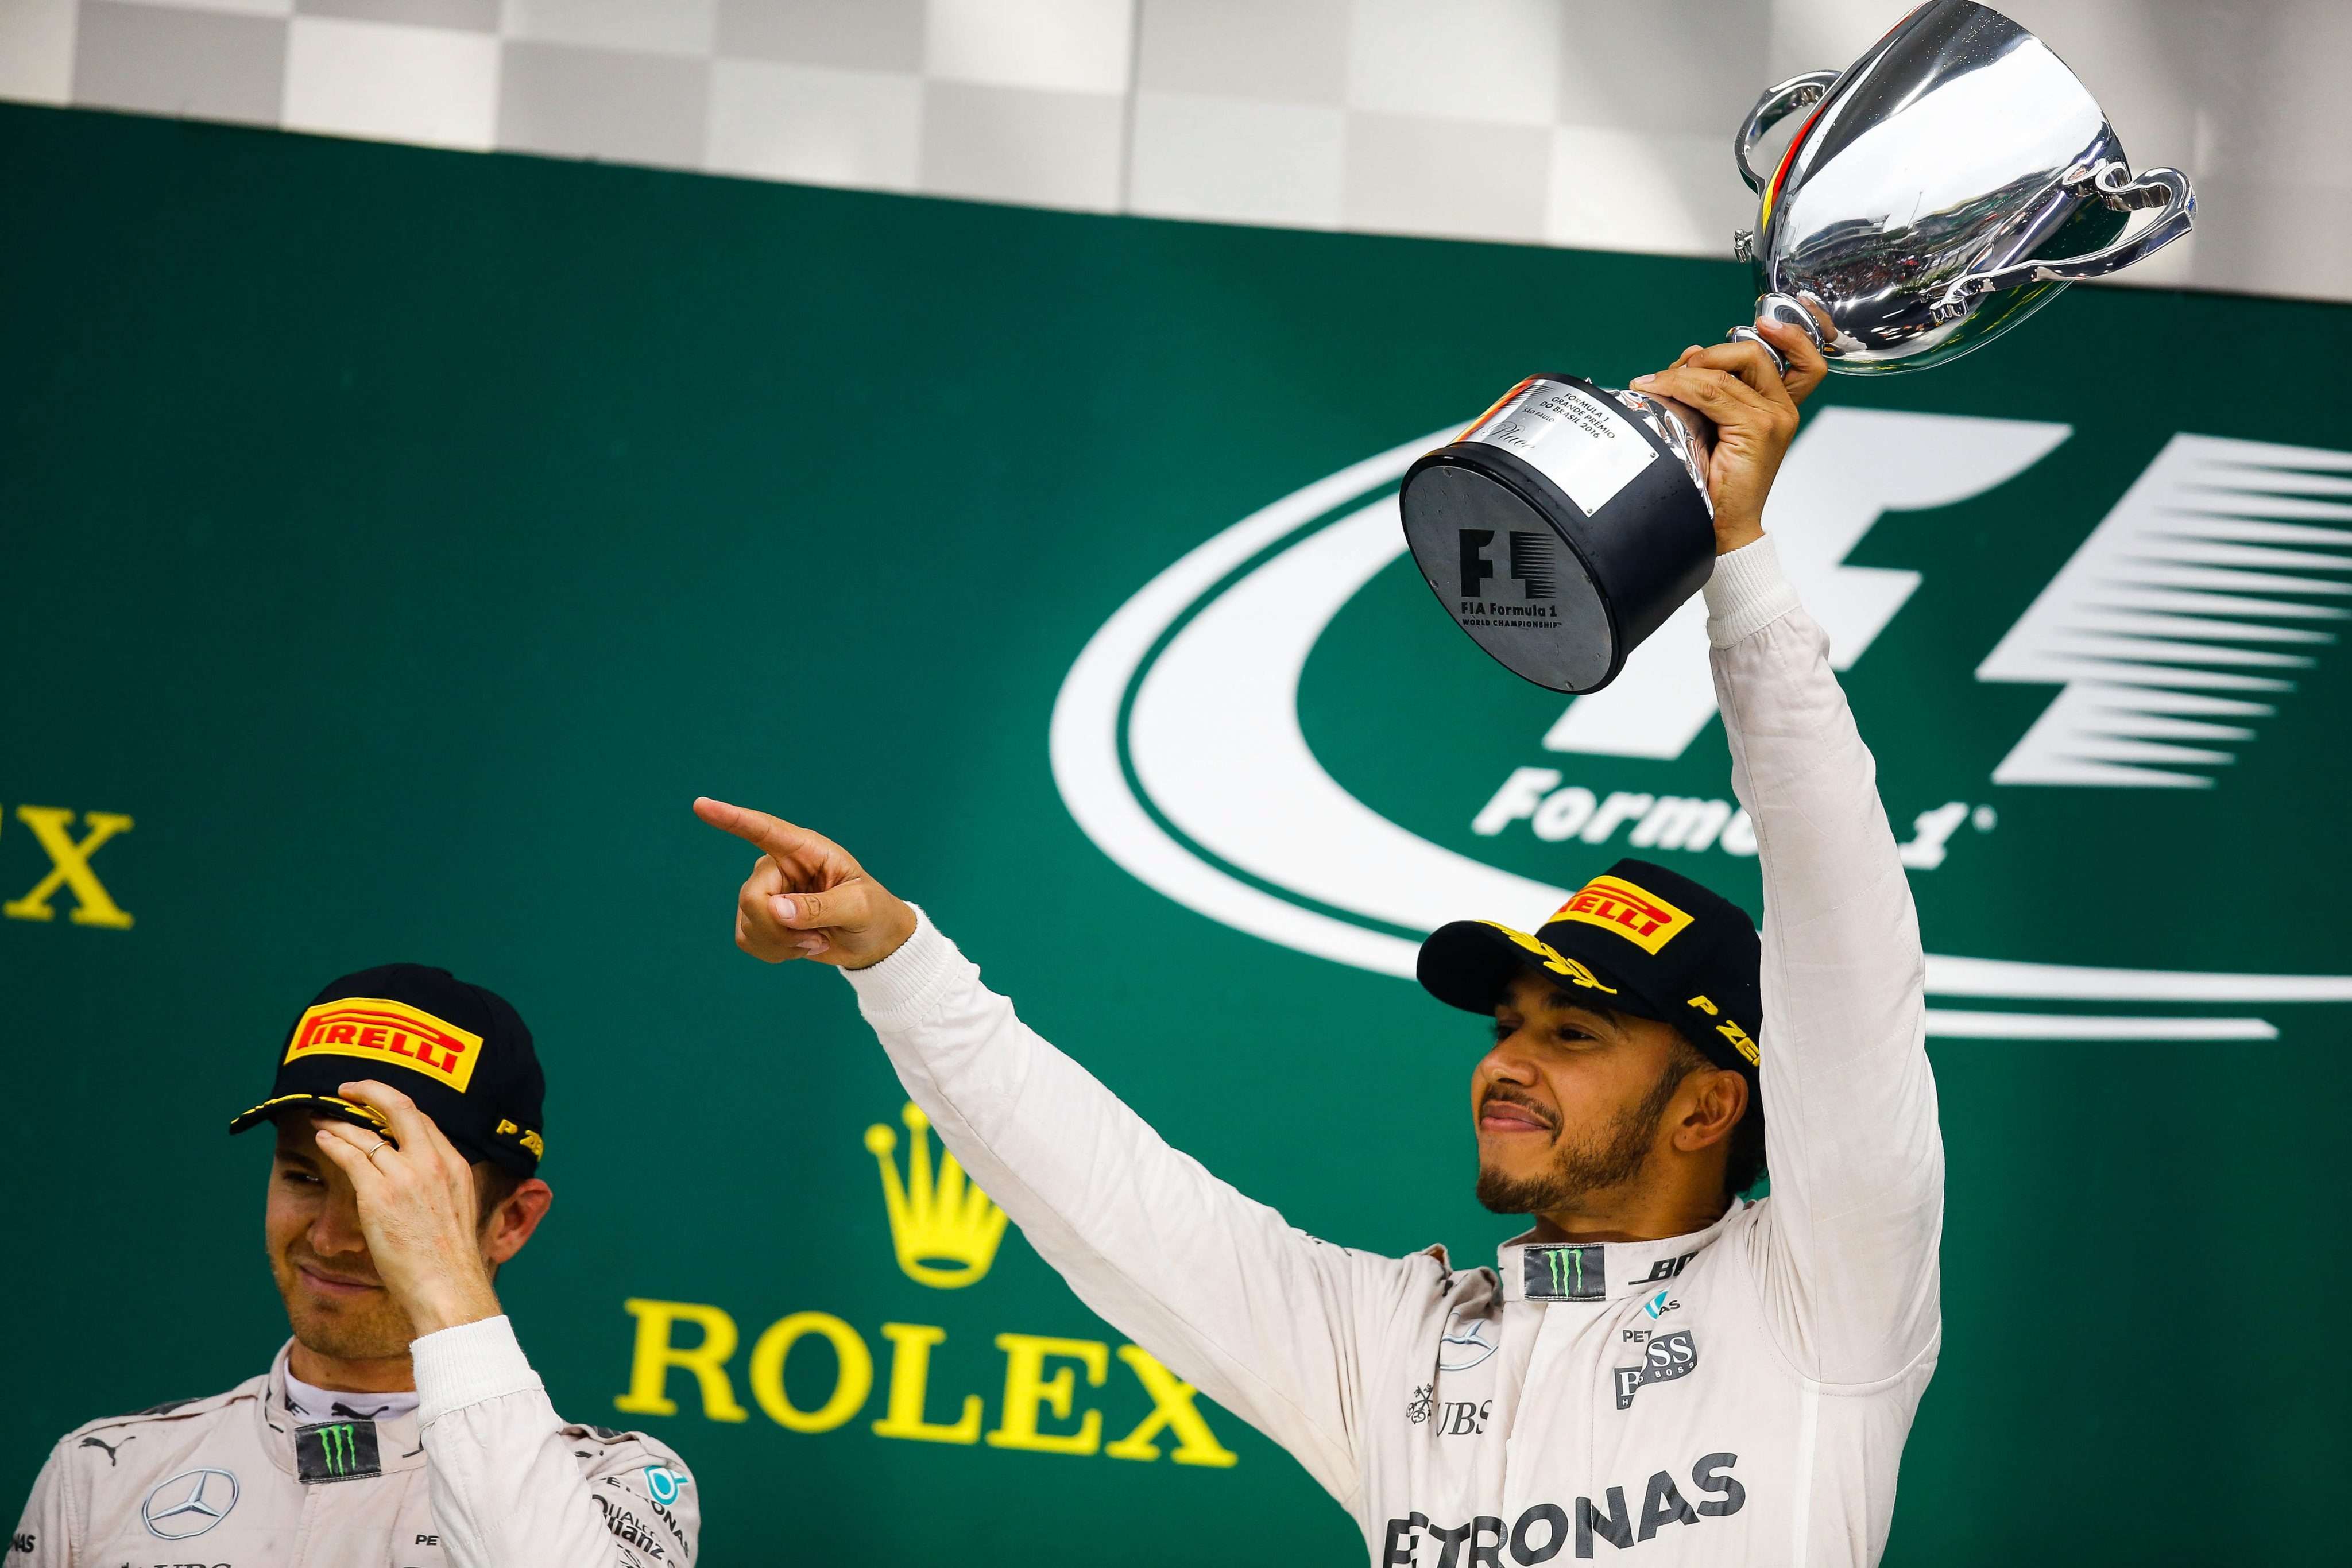 British driver Lewis Hamilton and German Nico Rosberg, both of Mercedes, celebrate on the podium after finishing in first and second place respectively at the Brazilian Grand Prix. Photo: EPA